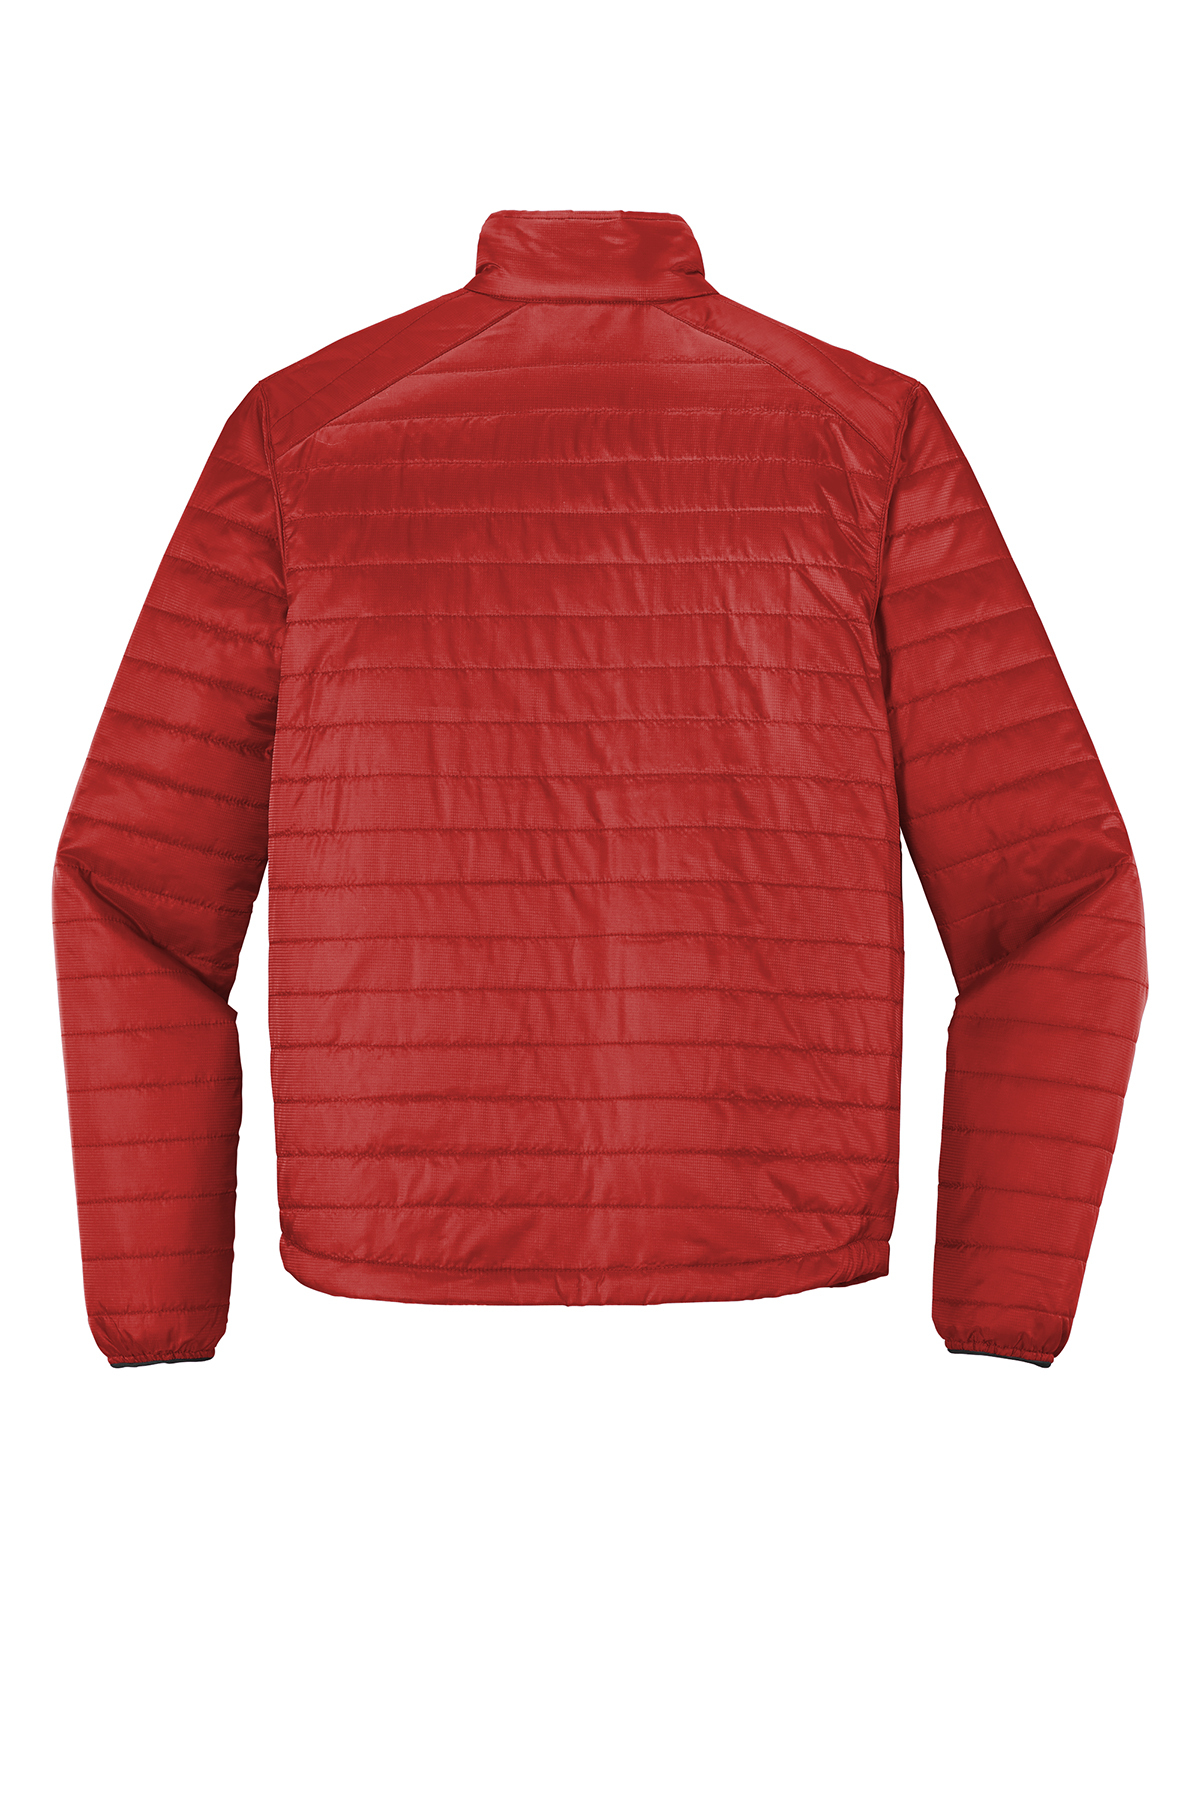 Port Authority Packable Puffy Jacket | Product | SanMar